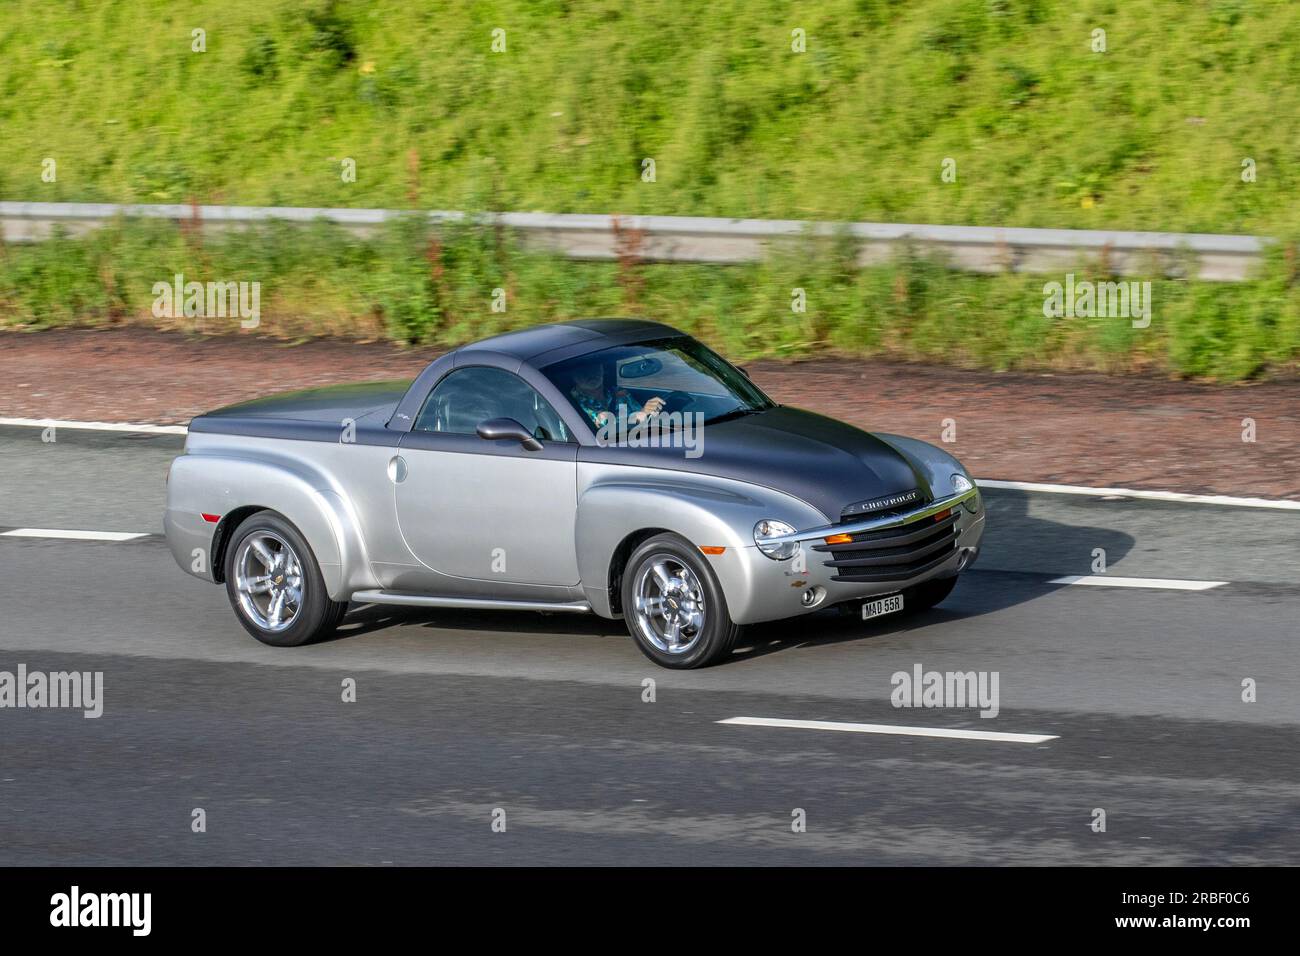 2005 Silver Chevrolet SSR Petrol 5998 cc, (Super Sport Roadster) a retro-styled retractable hardtop convertible pickup truck manufactured by Chevrolet; travelling at speed on the M6 motorway in Greater Manchester, UK Stock Photo